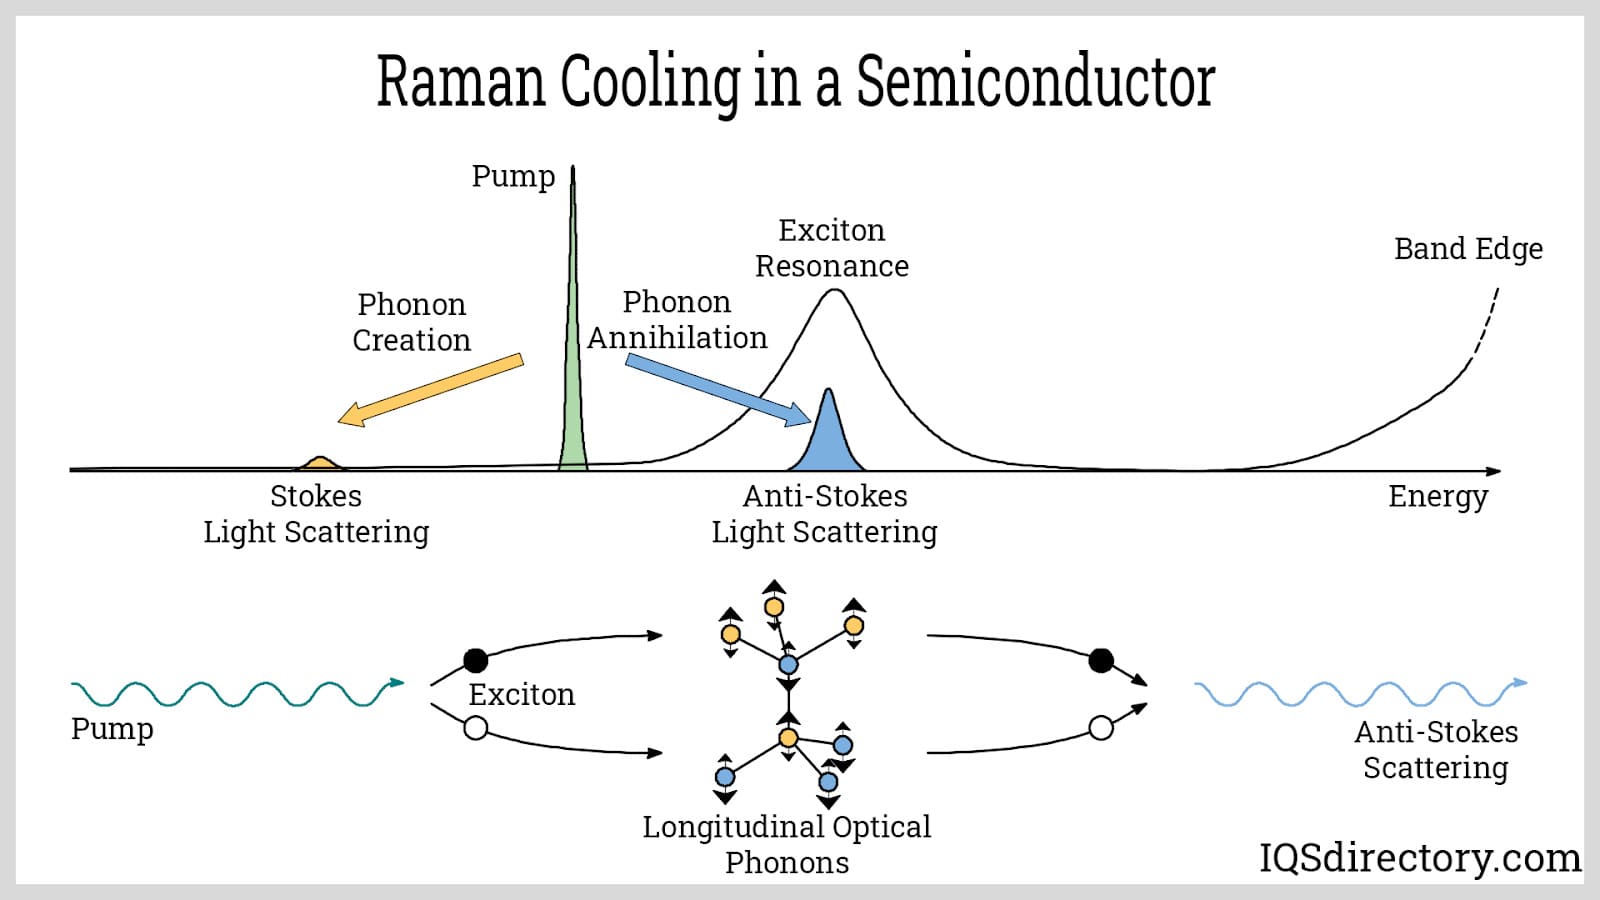 Raman Cooling in a Semiconductor